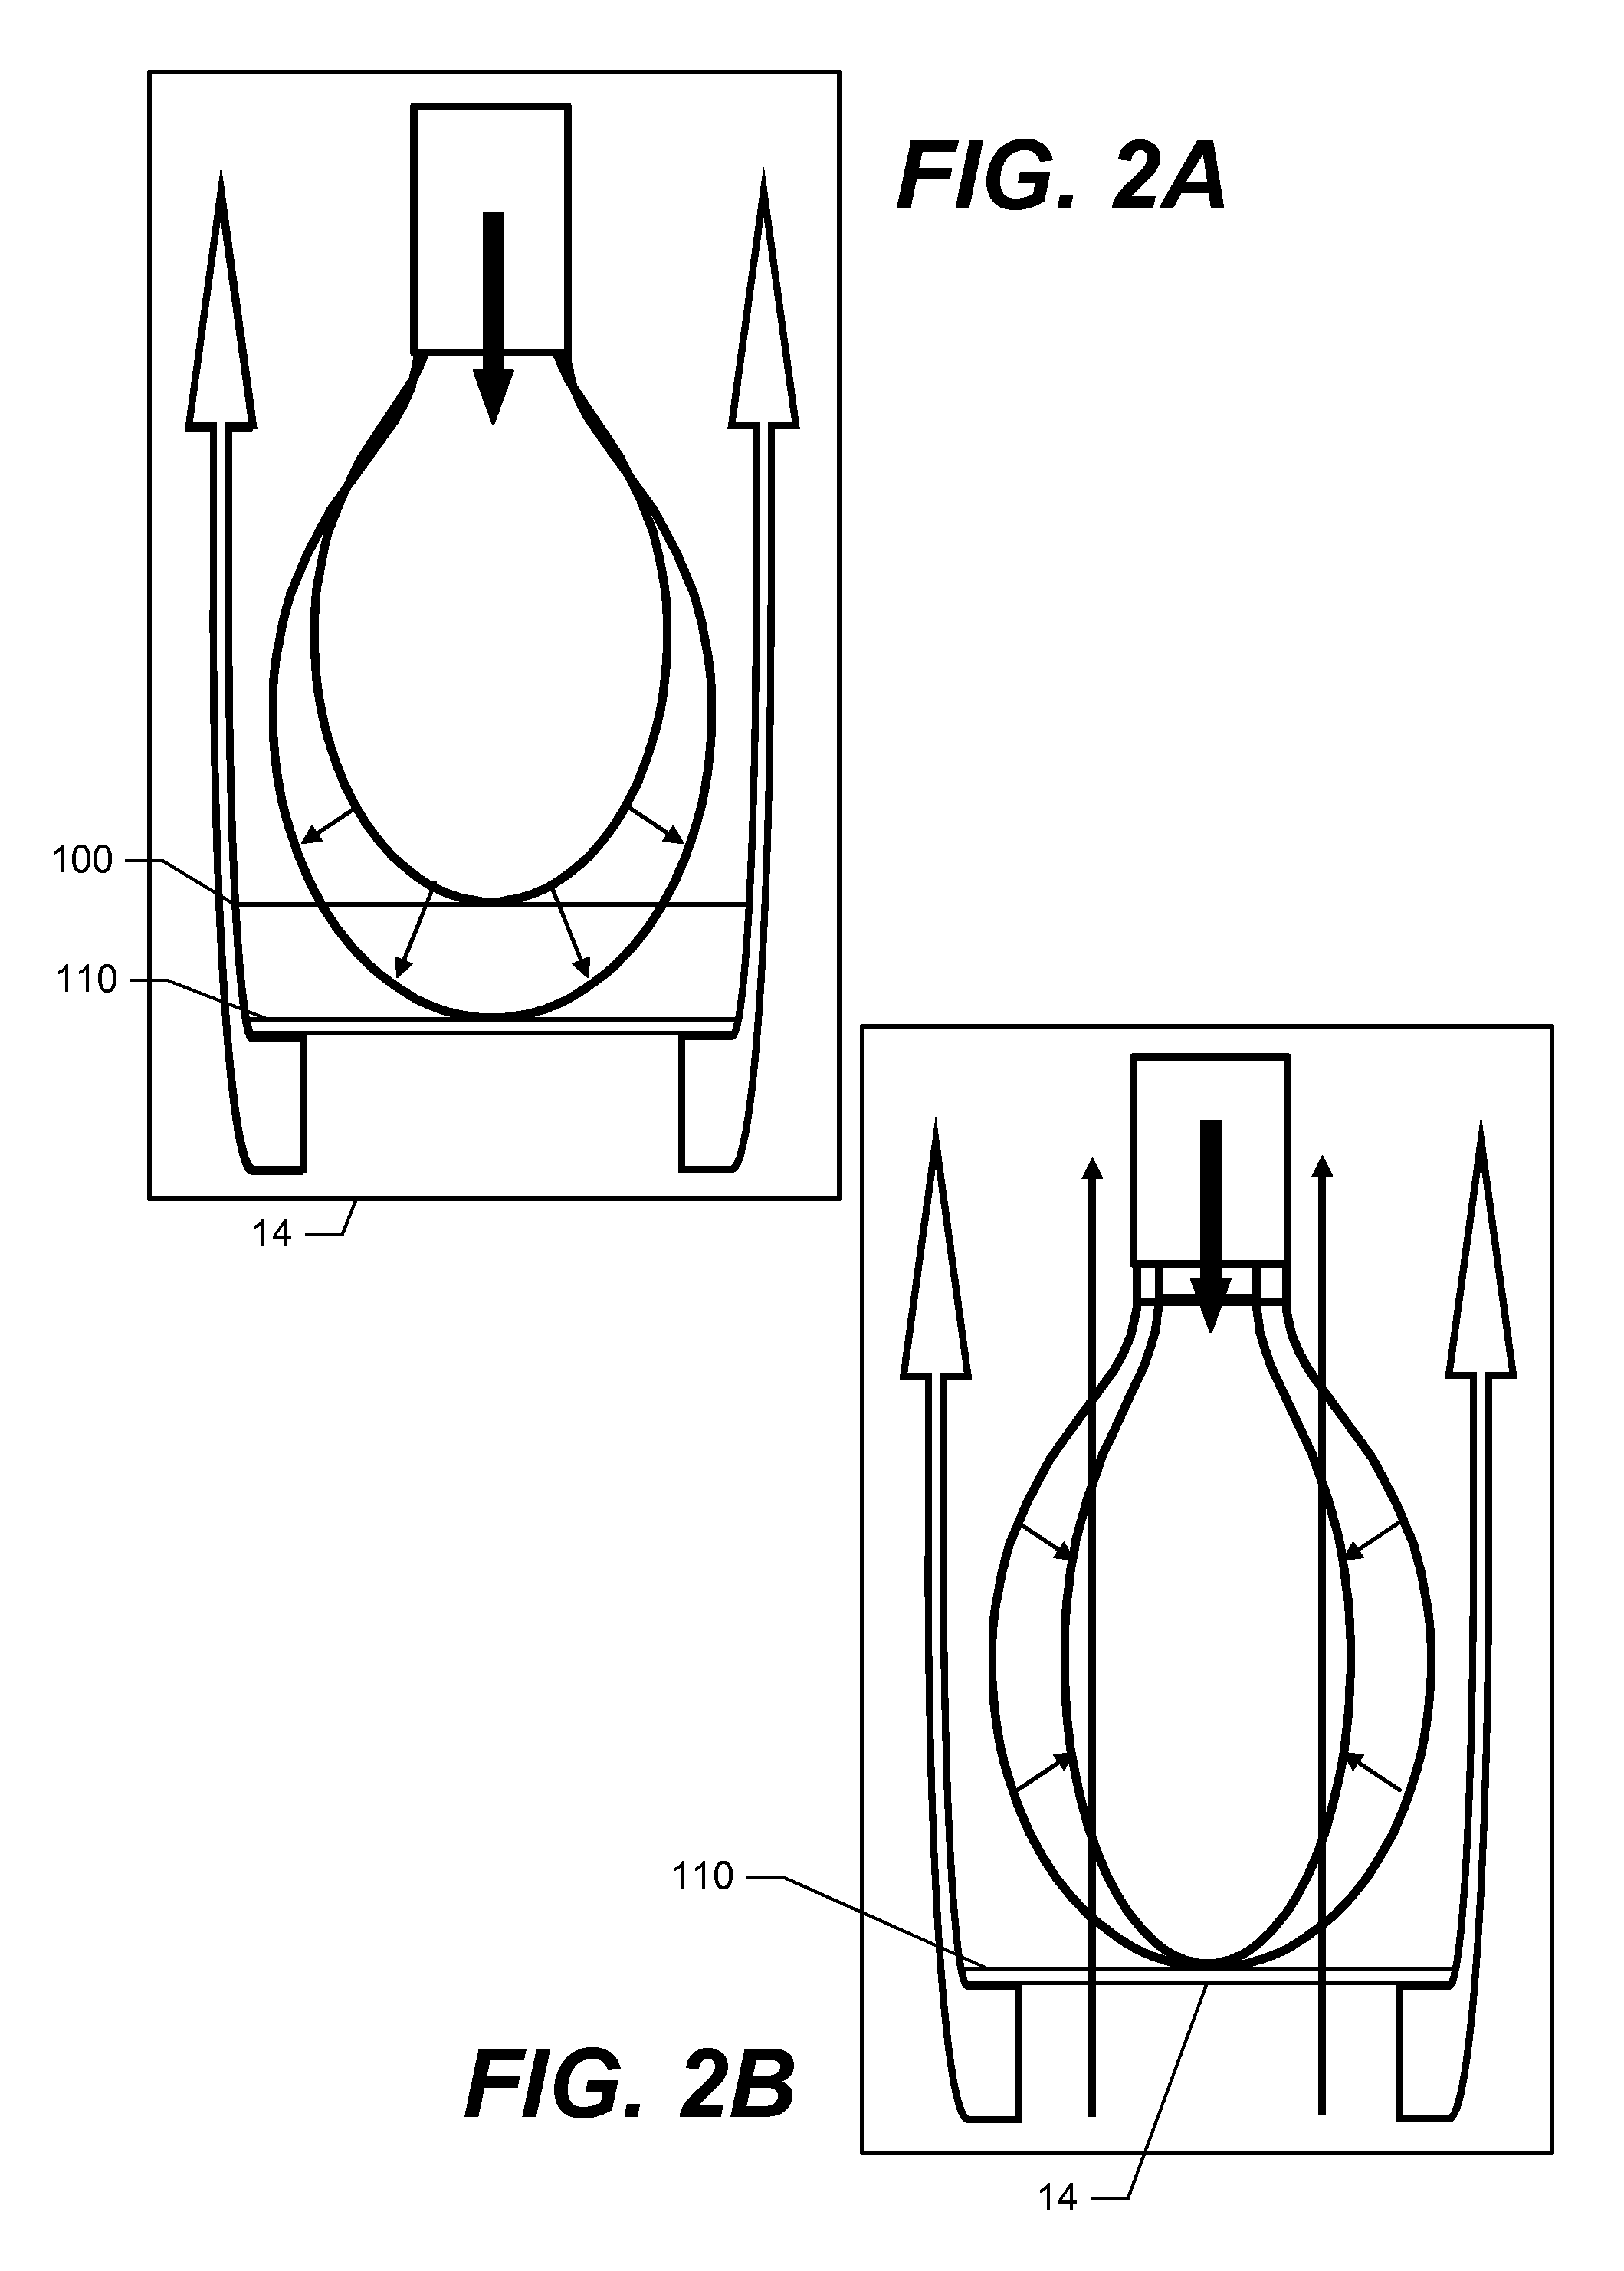 Stagnation point reverse flow combustor for a combustion system